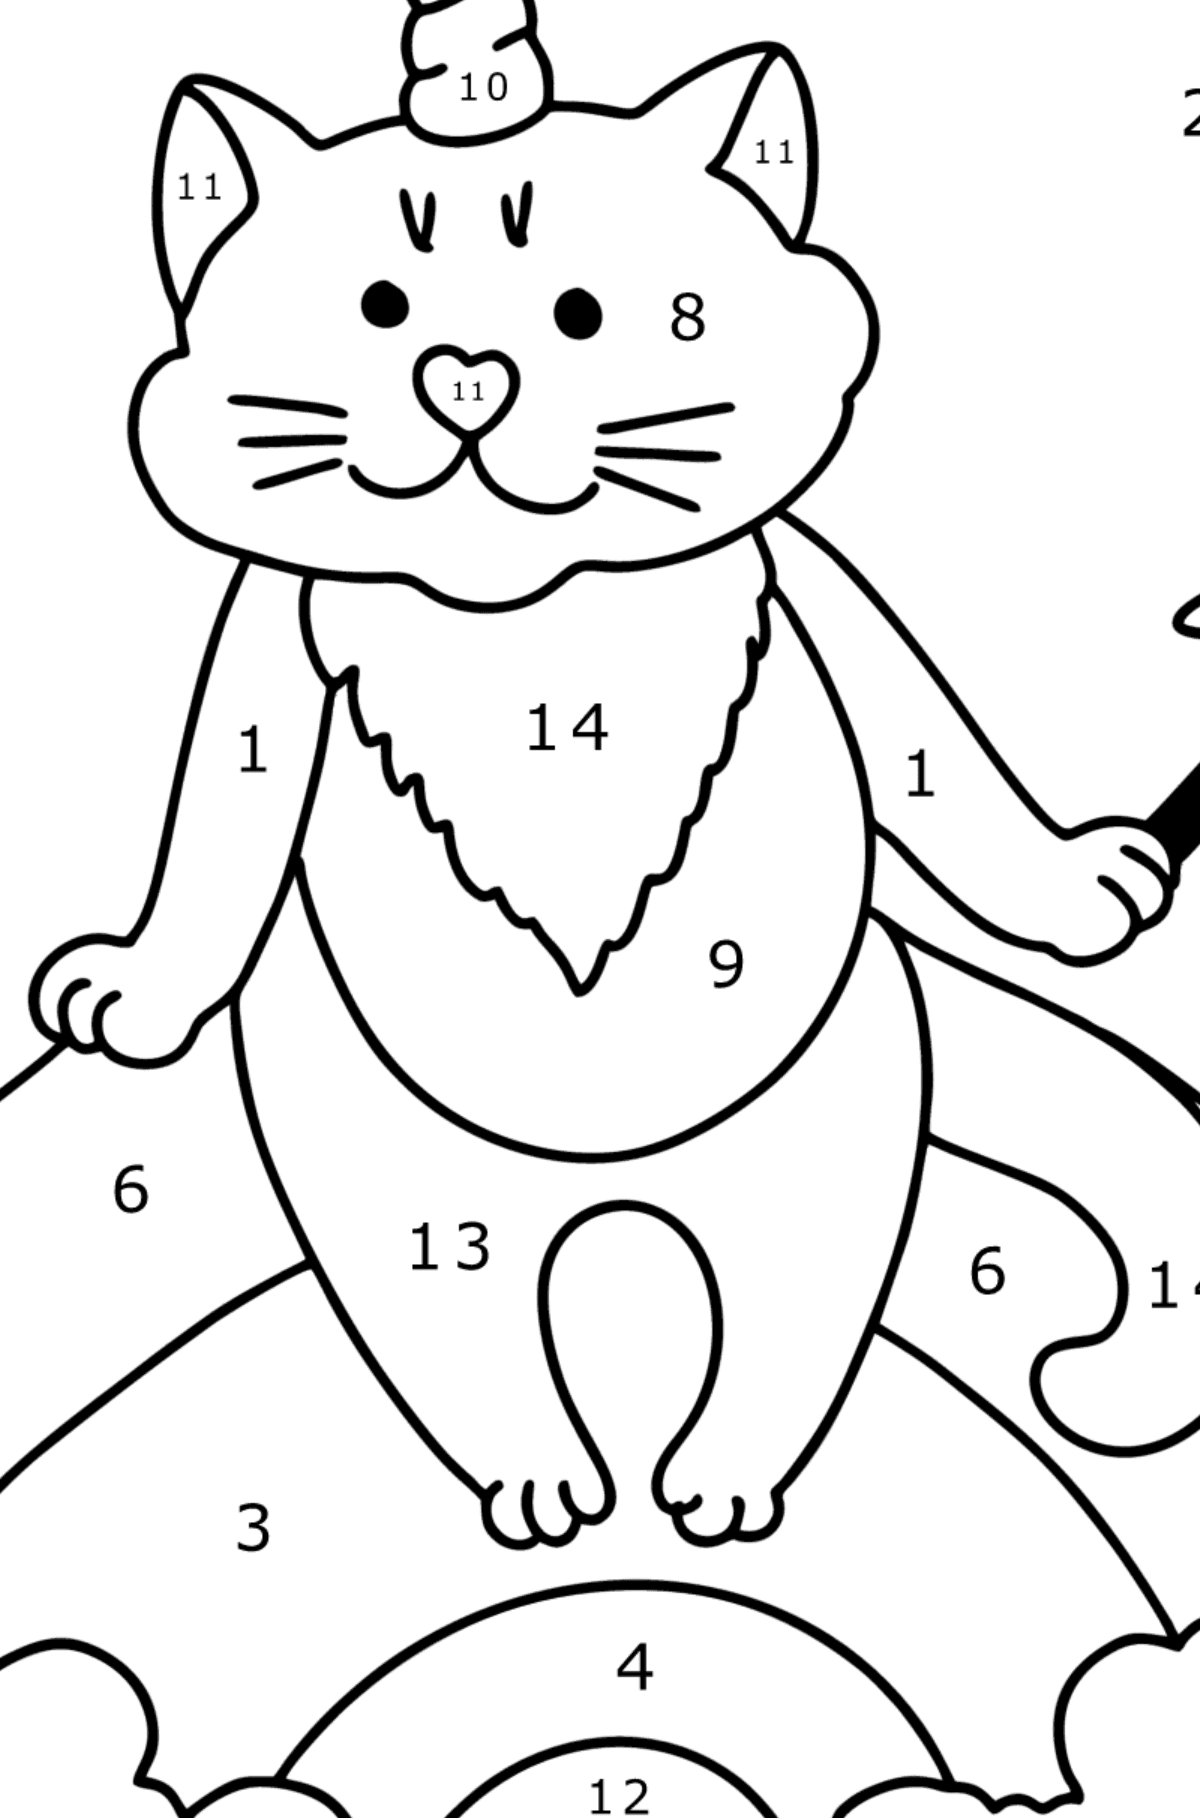 Kitten Unicorn coloring page - Coloring by Numbers for Kids